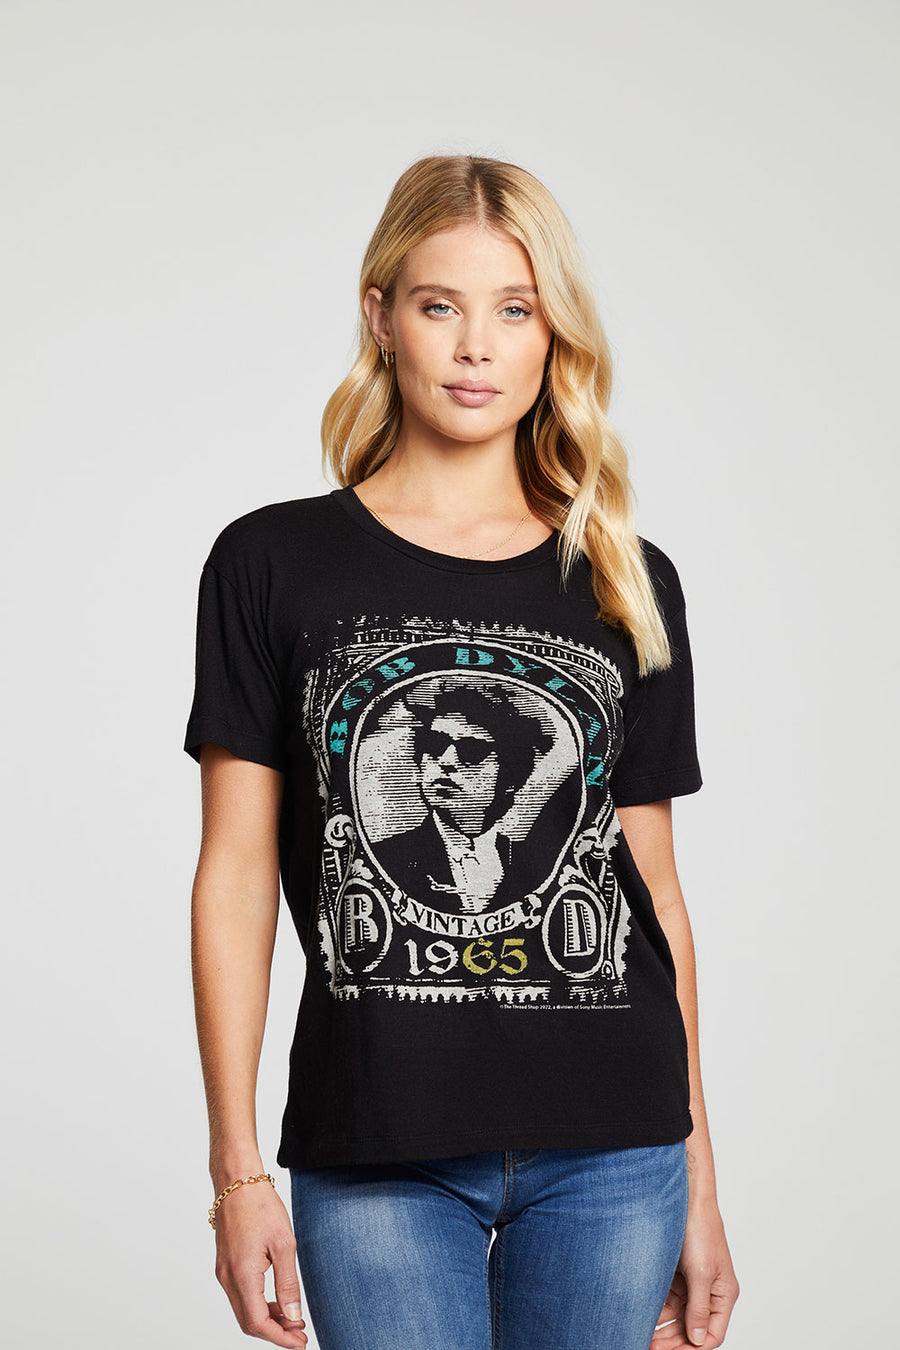 Bob Dylan Vintage 65 WOMENS chaserbrand